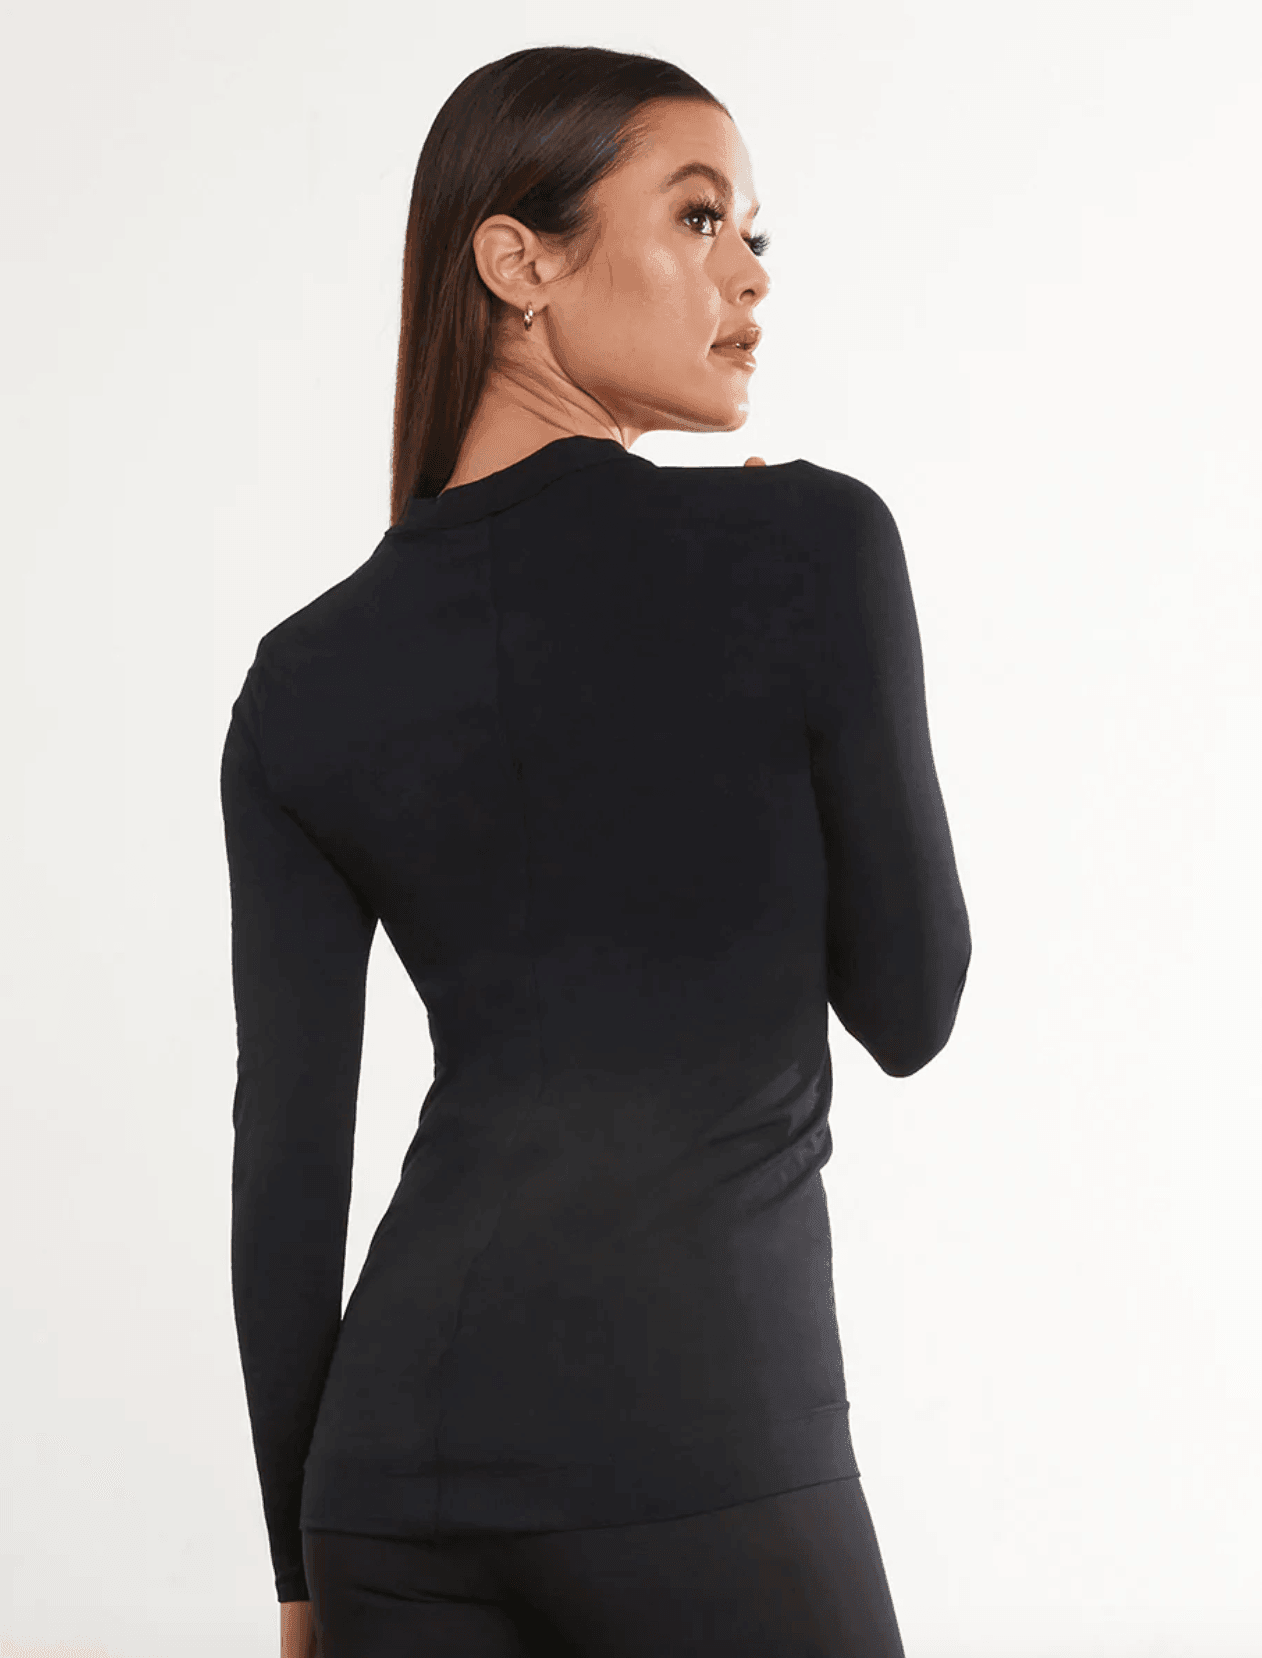 Commando - Butter Long Sleeved Black Top - 32 The Guild 